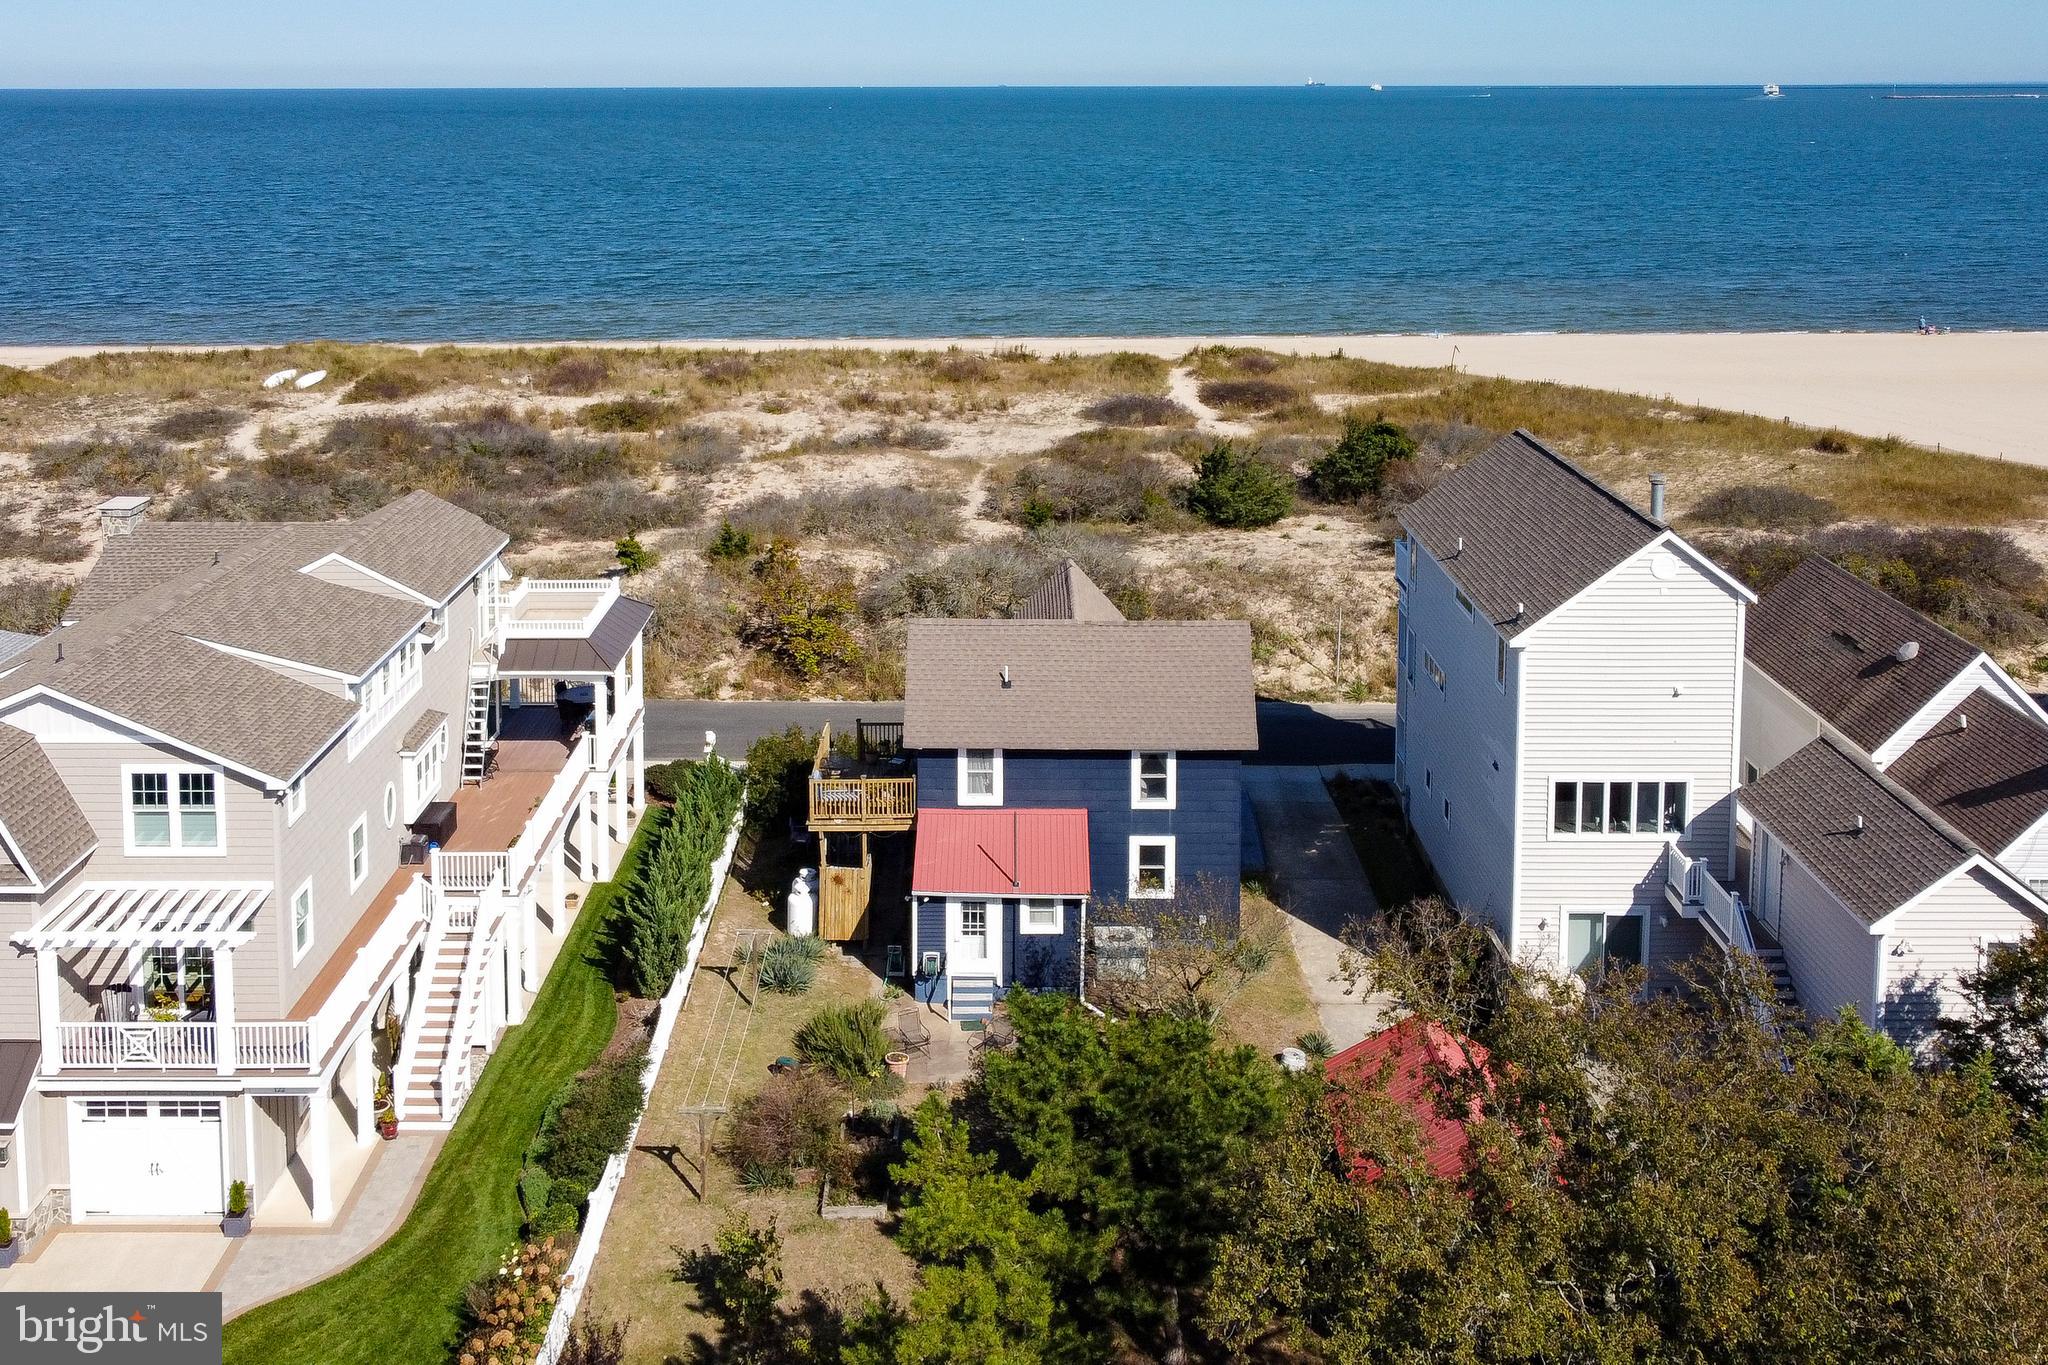 OVER 9,000 SQ FT OF BEACHFRONT PROPERTY - Take a front-row seat for panoramic sunrises & sunsets and catch the sea breezes over the picturesque dunes that buffer this home from the Delaware Bay. This early 1900s home on Lewes Beach has been lived in year round with some renovations over the last 20 years. The good bones of this house are an opportunity for those who may want to own a historic beach getaway or you could take this landmark location to build your beautiful new beach home. This parcel offers room for a 2 car garage & plenty of additional parking with frontage on both Bay Ave & Bayview Ave. Walk to dinner and shopping on picturesque Second Street, and on the way back stop for a treat at the famous Lewes Beach Dairy Queen, located just around the corner on E Savannah Rd.  Don't forget you can bike to nearby Cape Henlopen State Park, Junction & Breakwater, and Gordons Pond Bike Trails. Make 118 Bay Ave your beach dream come true!